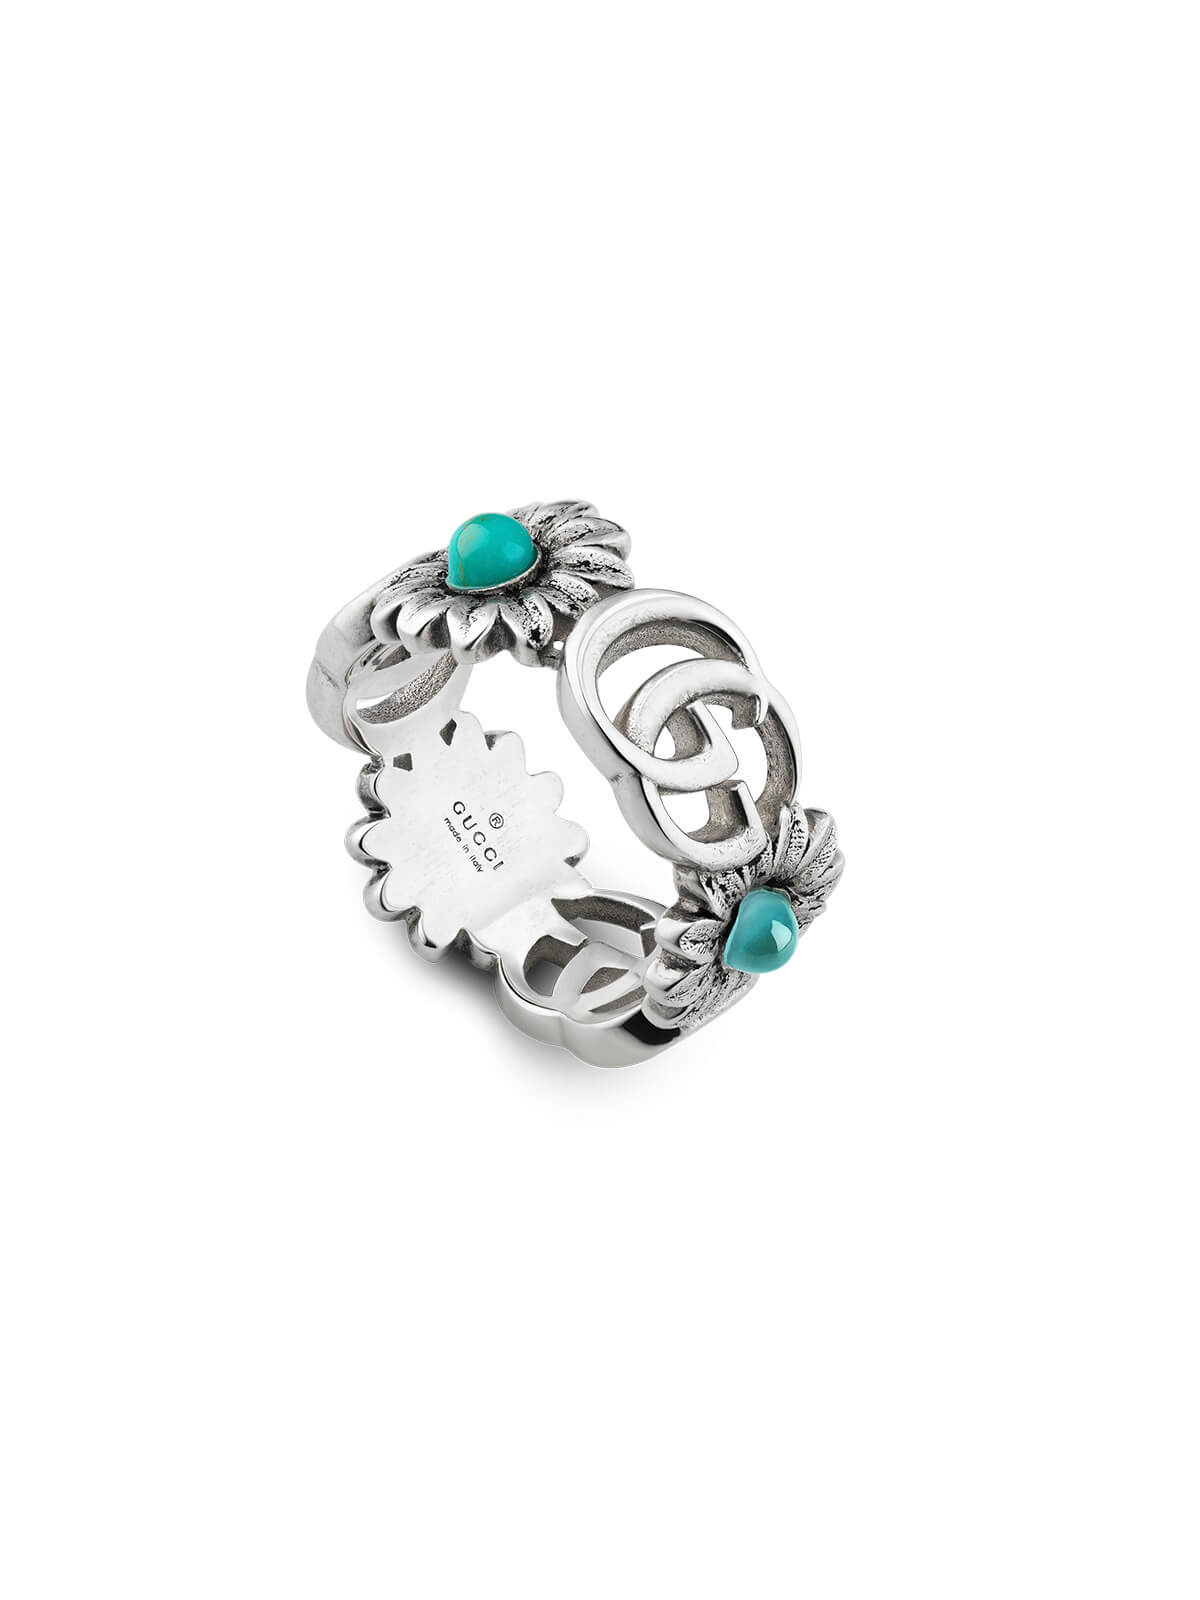 Gucci GG Marmont Ring in Silver, Blue Topaz & Turquoise - Size Q YBC527394001017